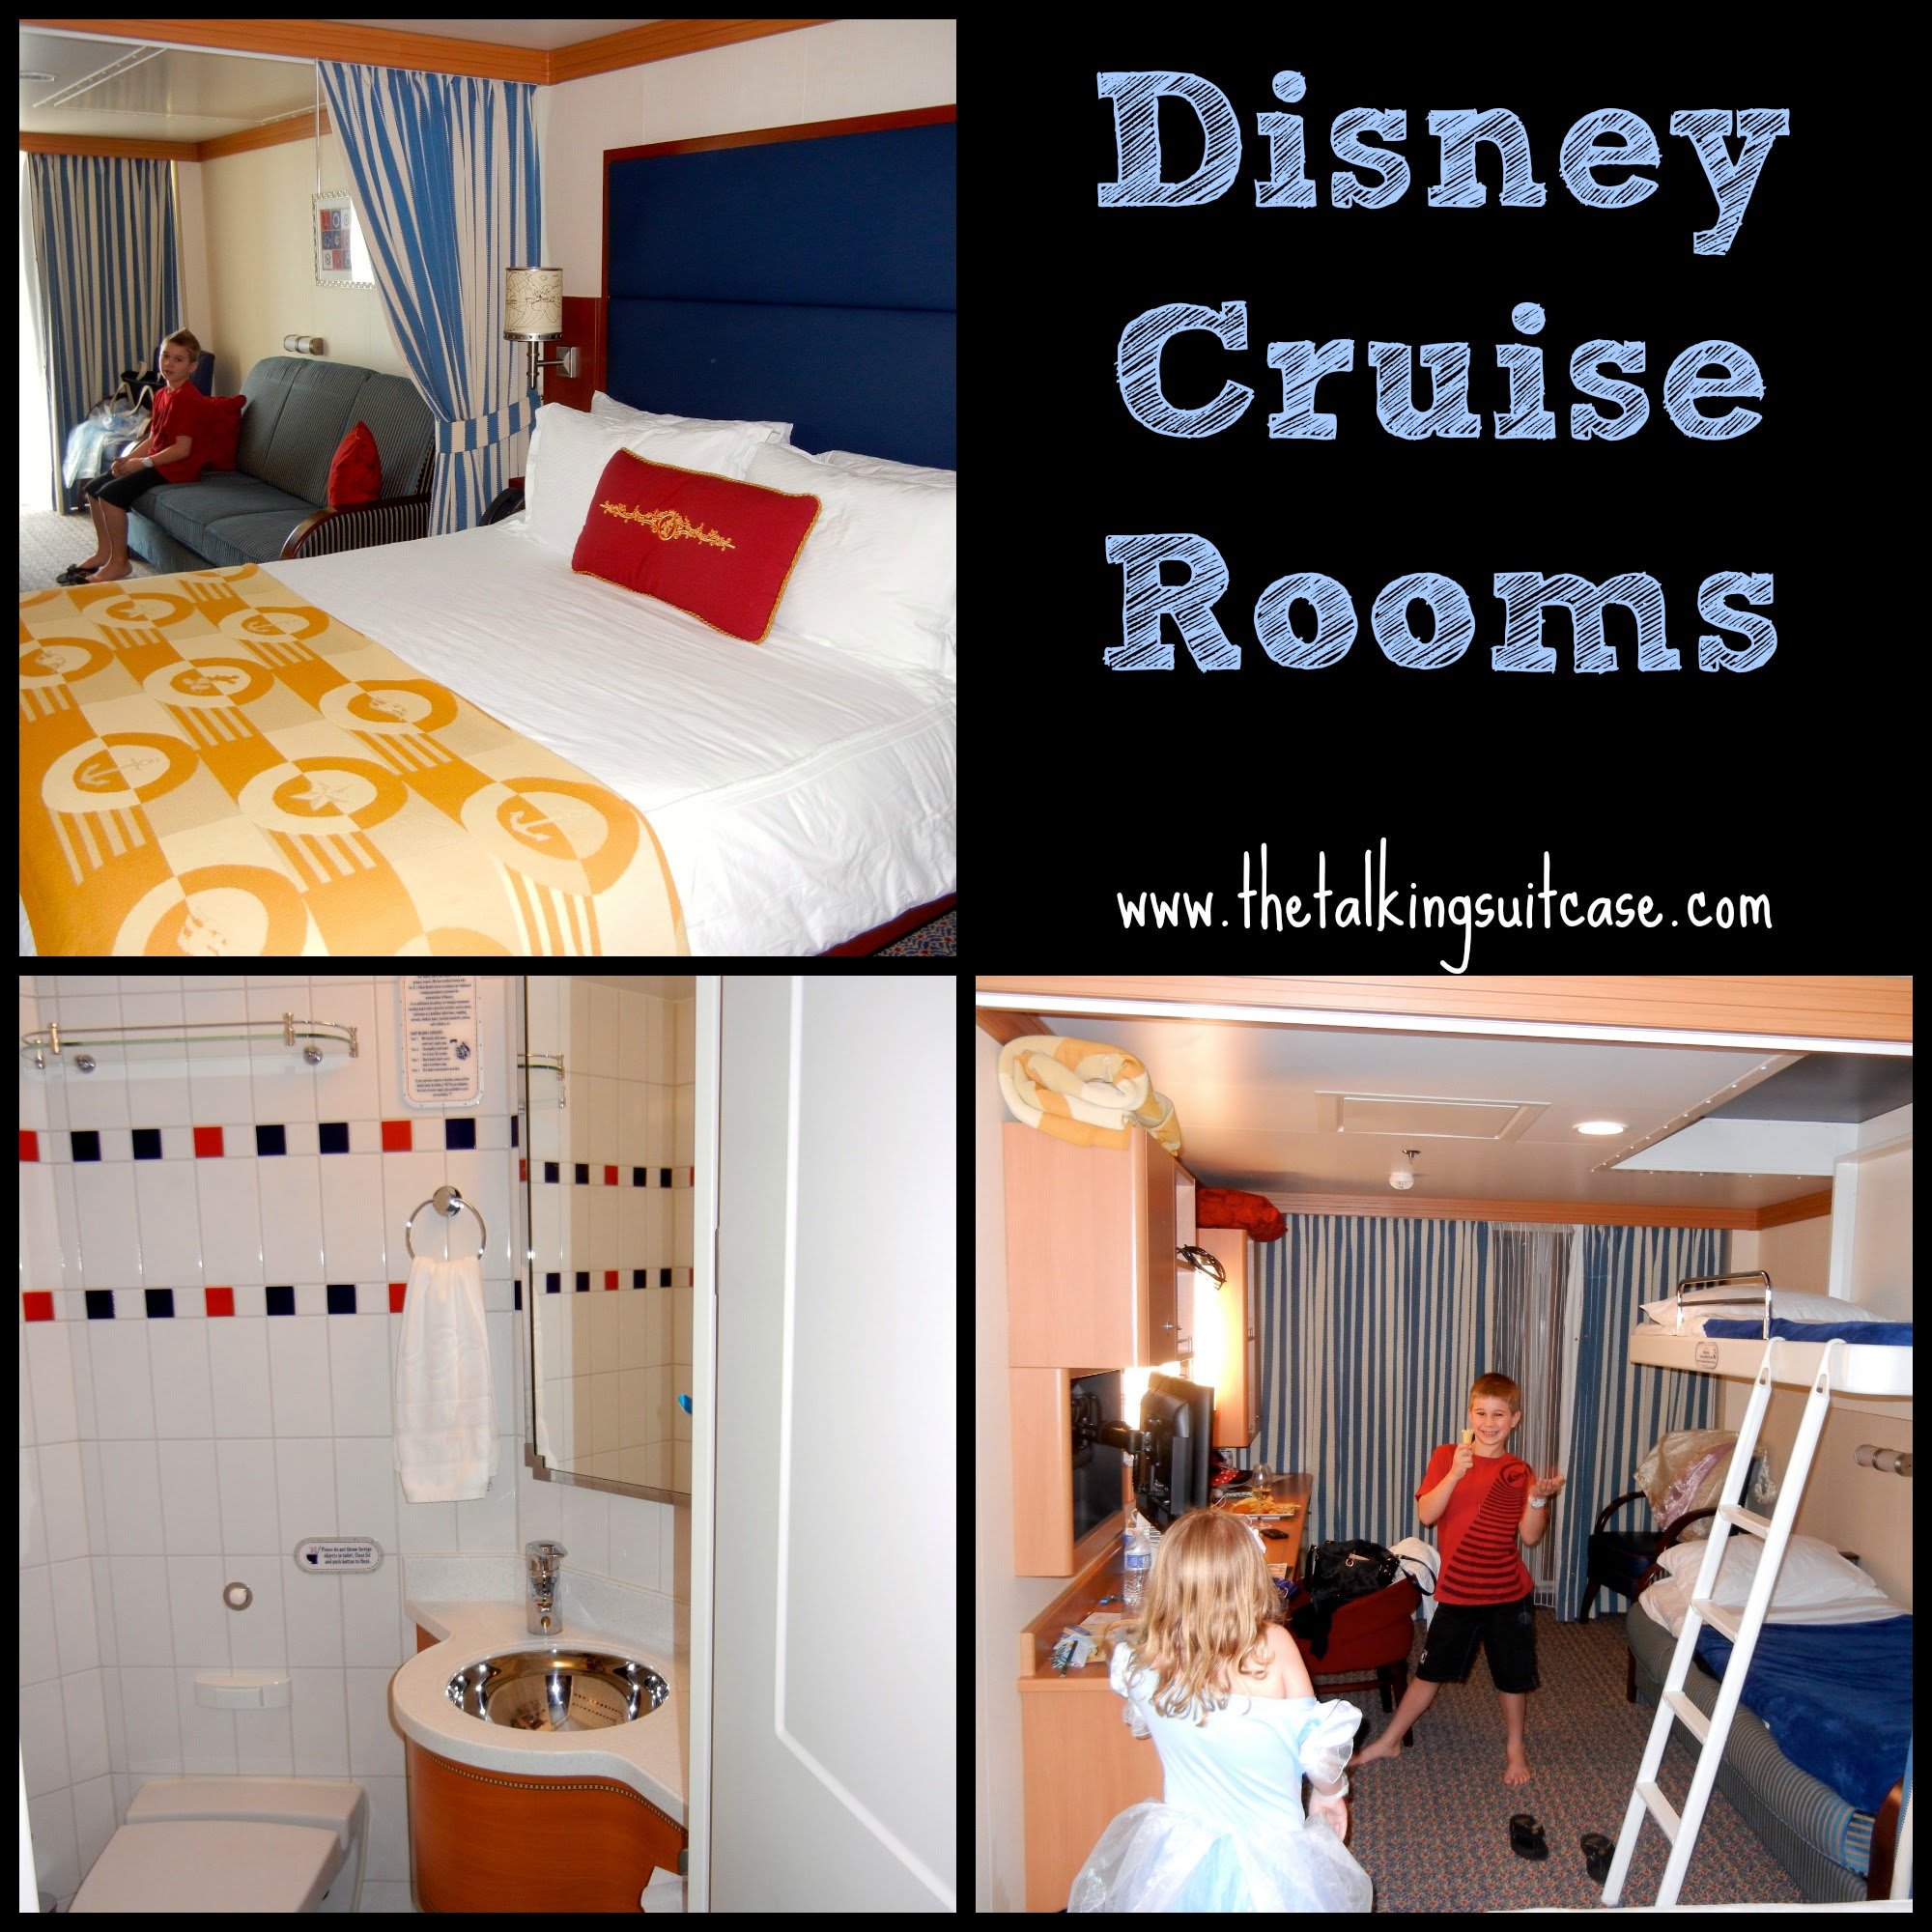 Disney Cruise Archives - The Talking Suitcase